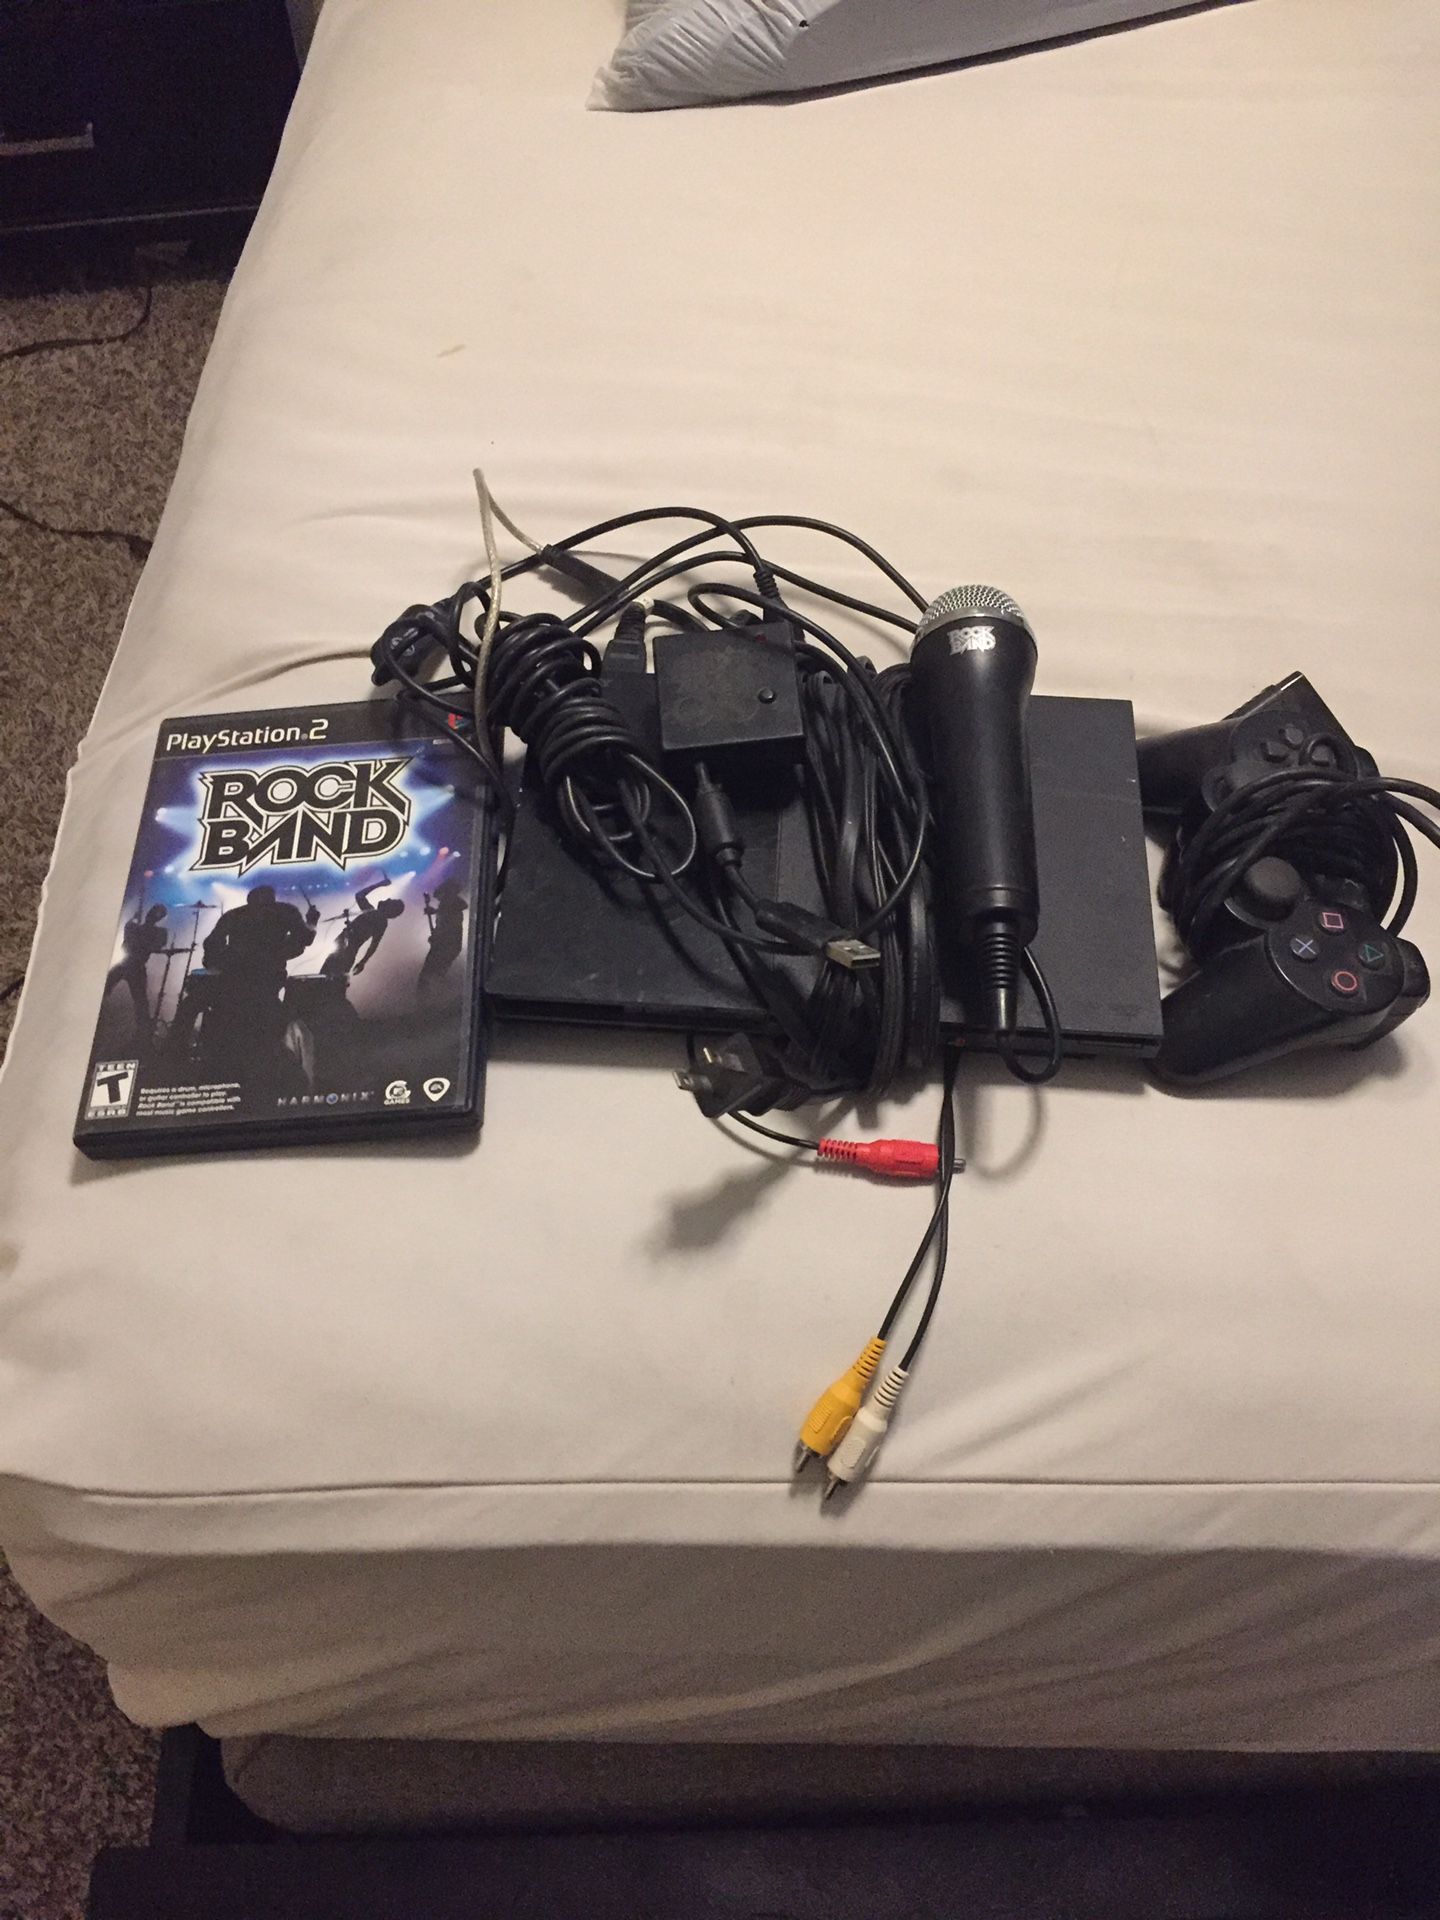 Ps2 with rock and